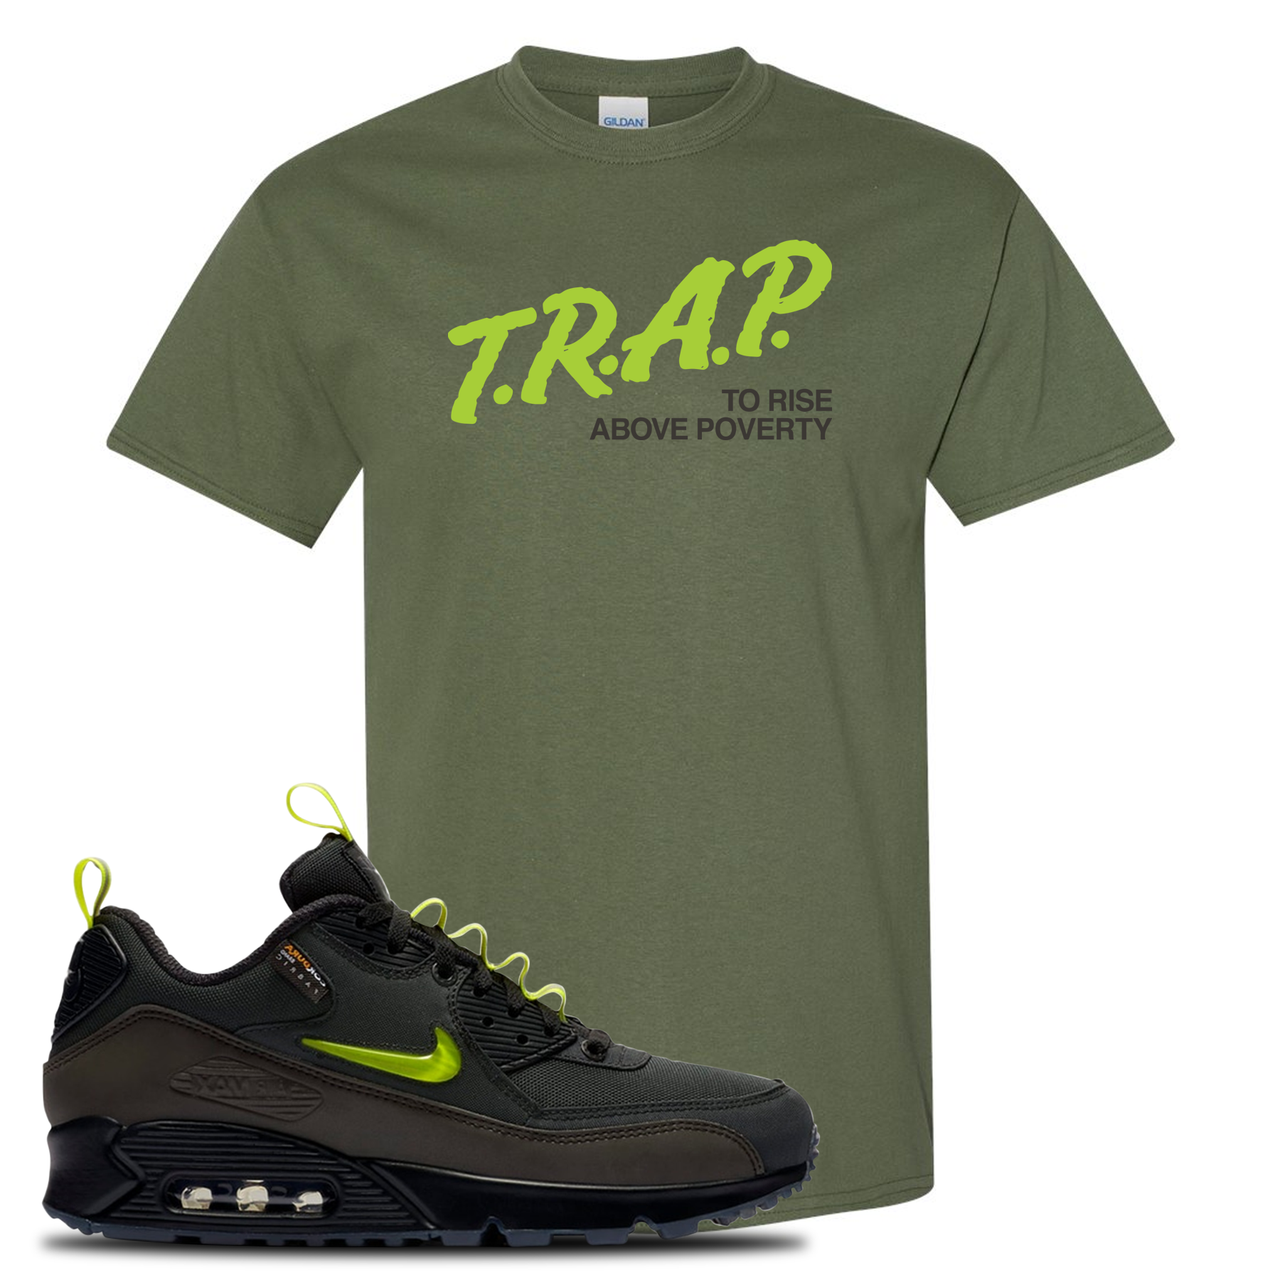 The Basement X Air Max 90 Manchester Trap to Rise Above Poverty Military Green Sneaker Hook Up T-Shirt